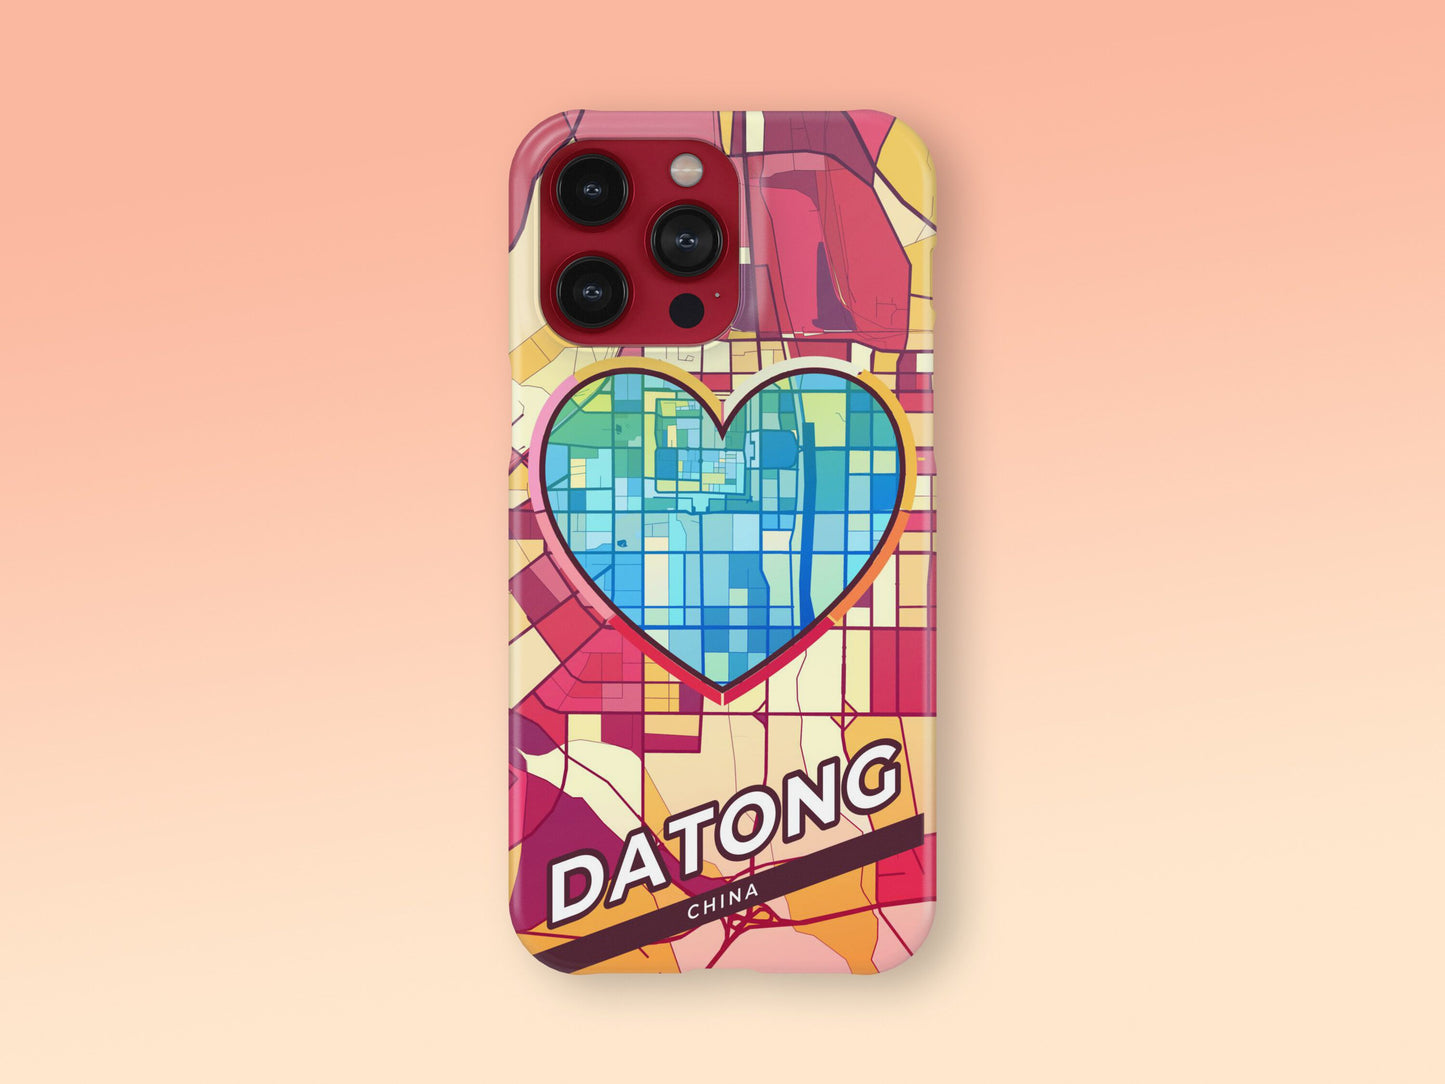 Datong China slim phone case with colorful icon. Birthday, wedding or housewarming gift. Couple match cases. 2